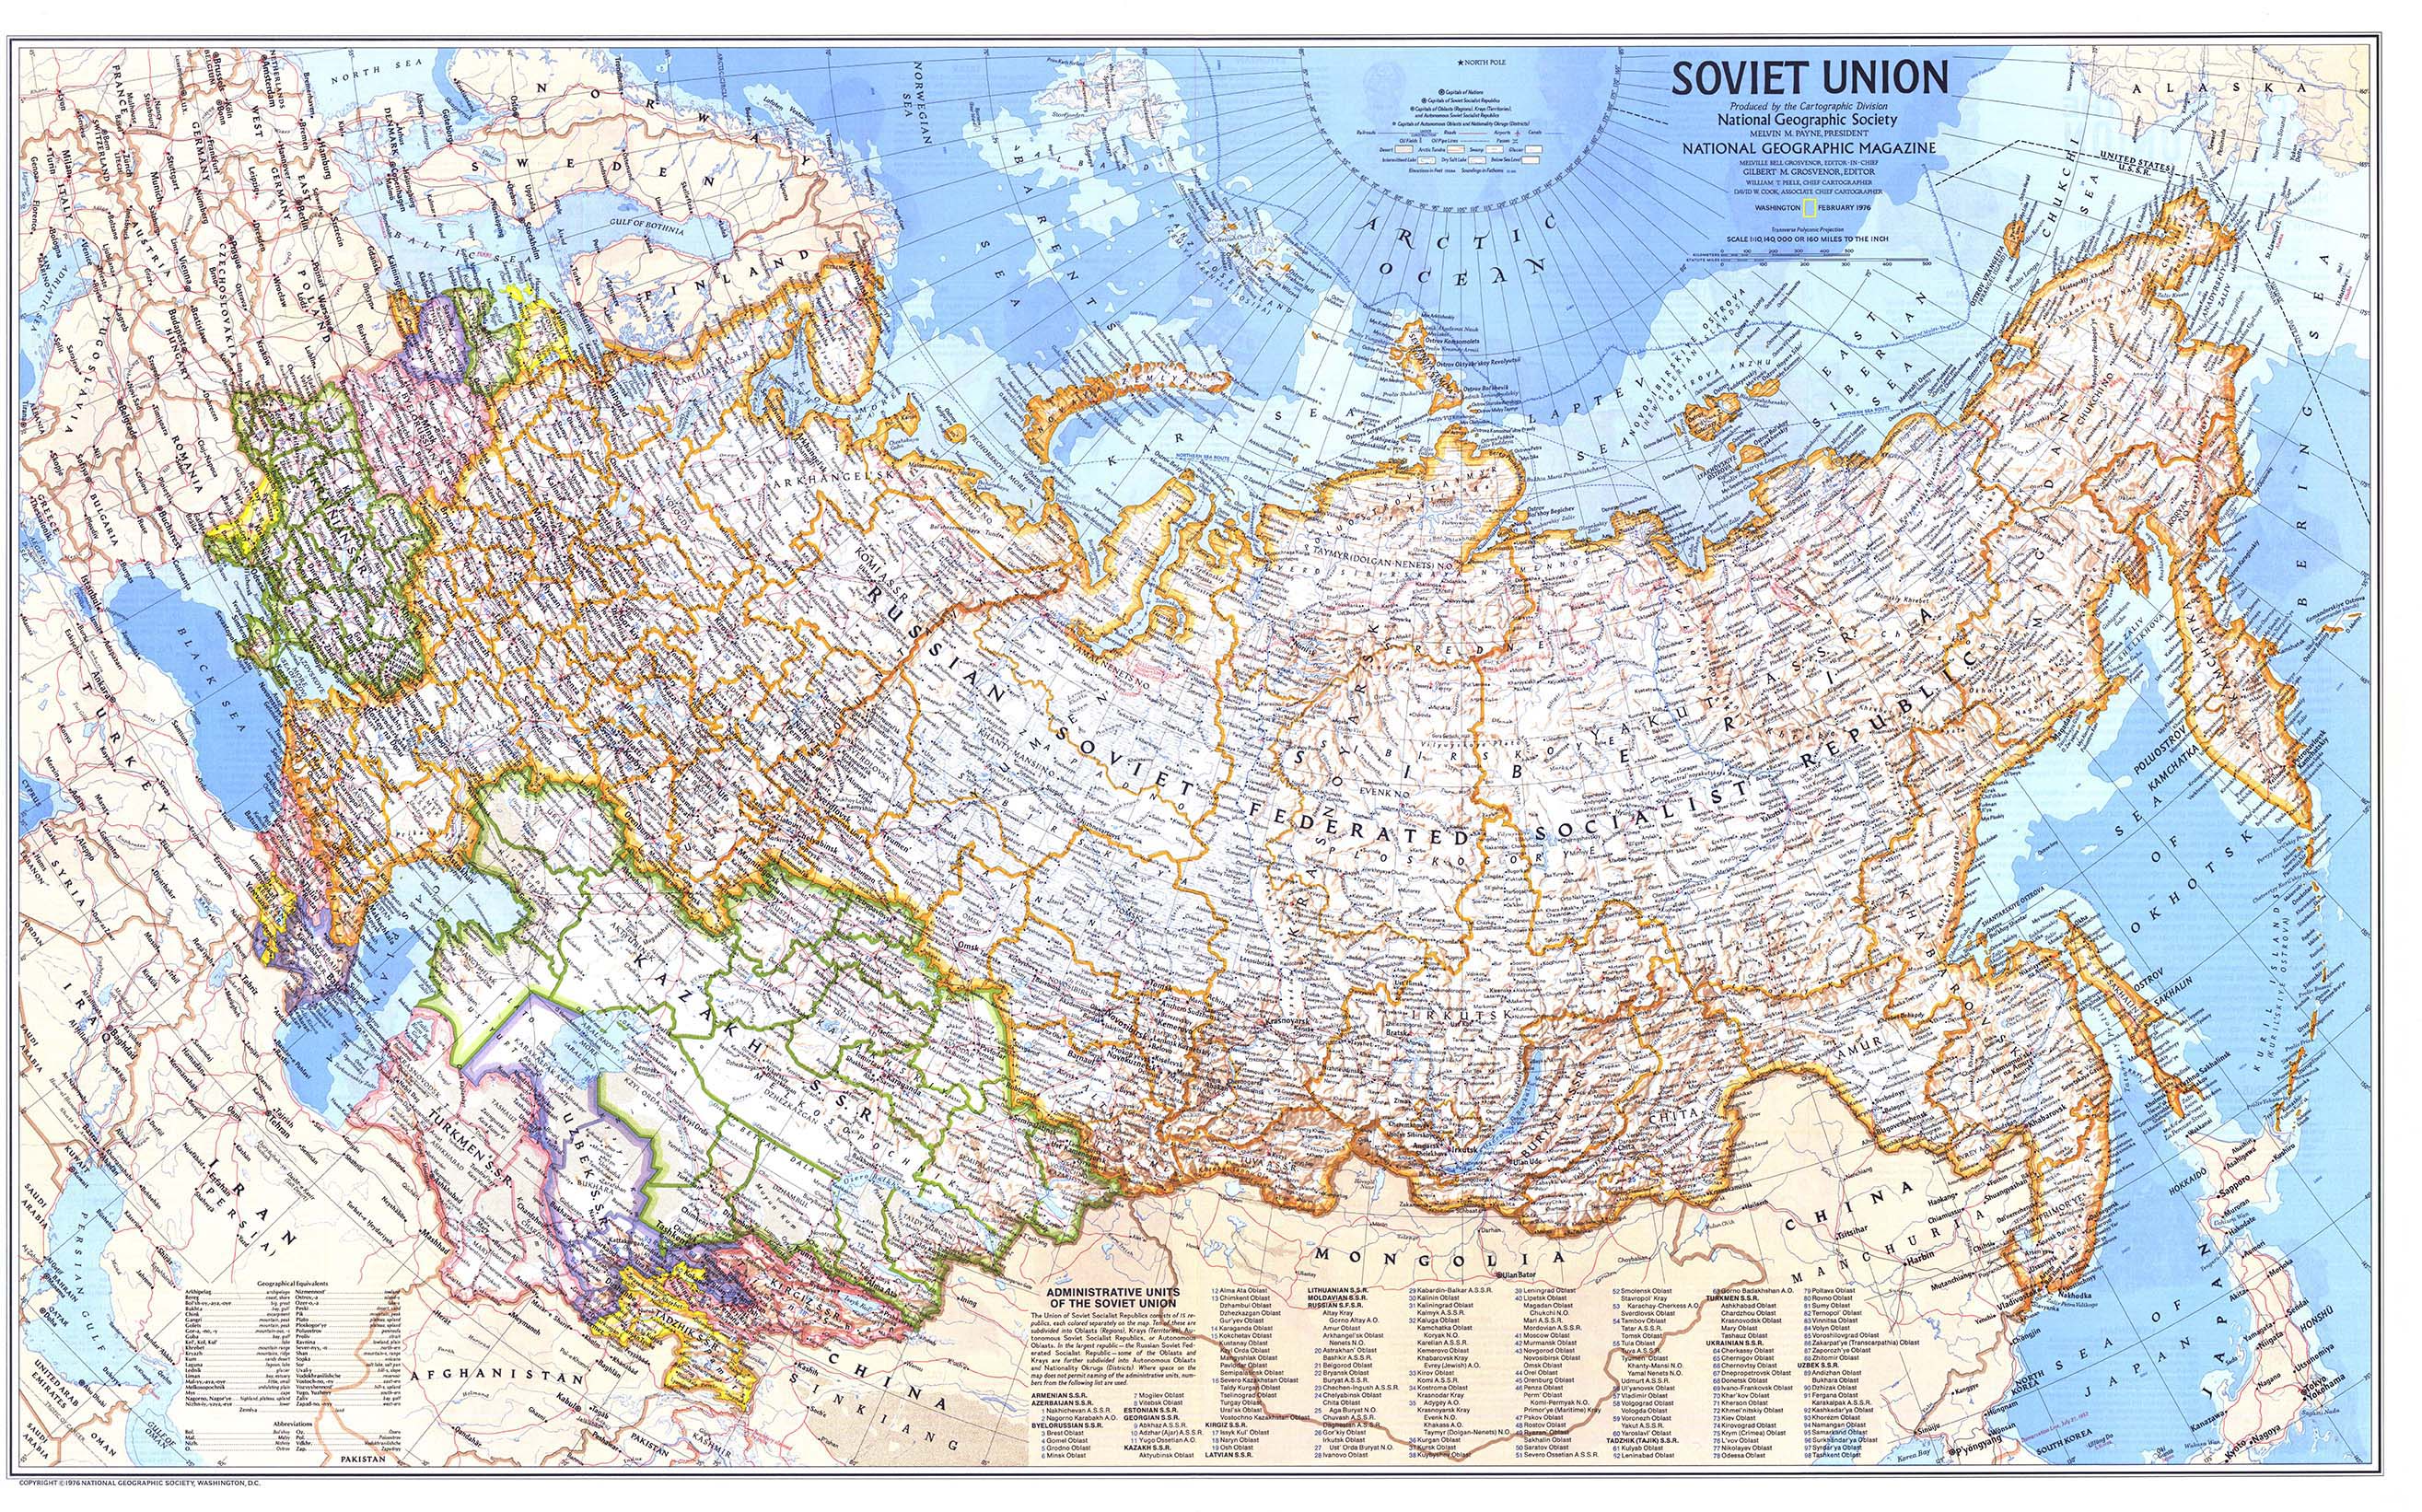 Soviet Union 1976 Wall Map By National Geographic